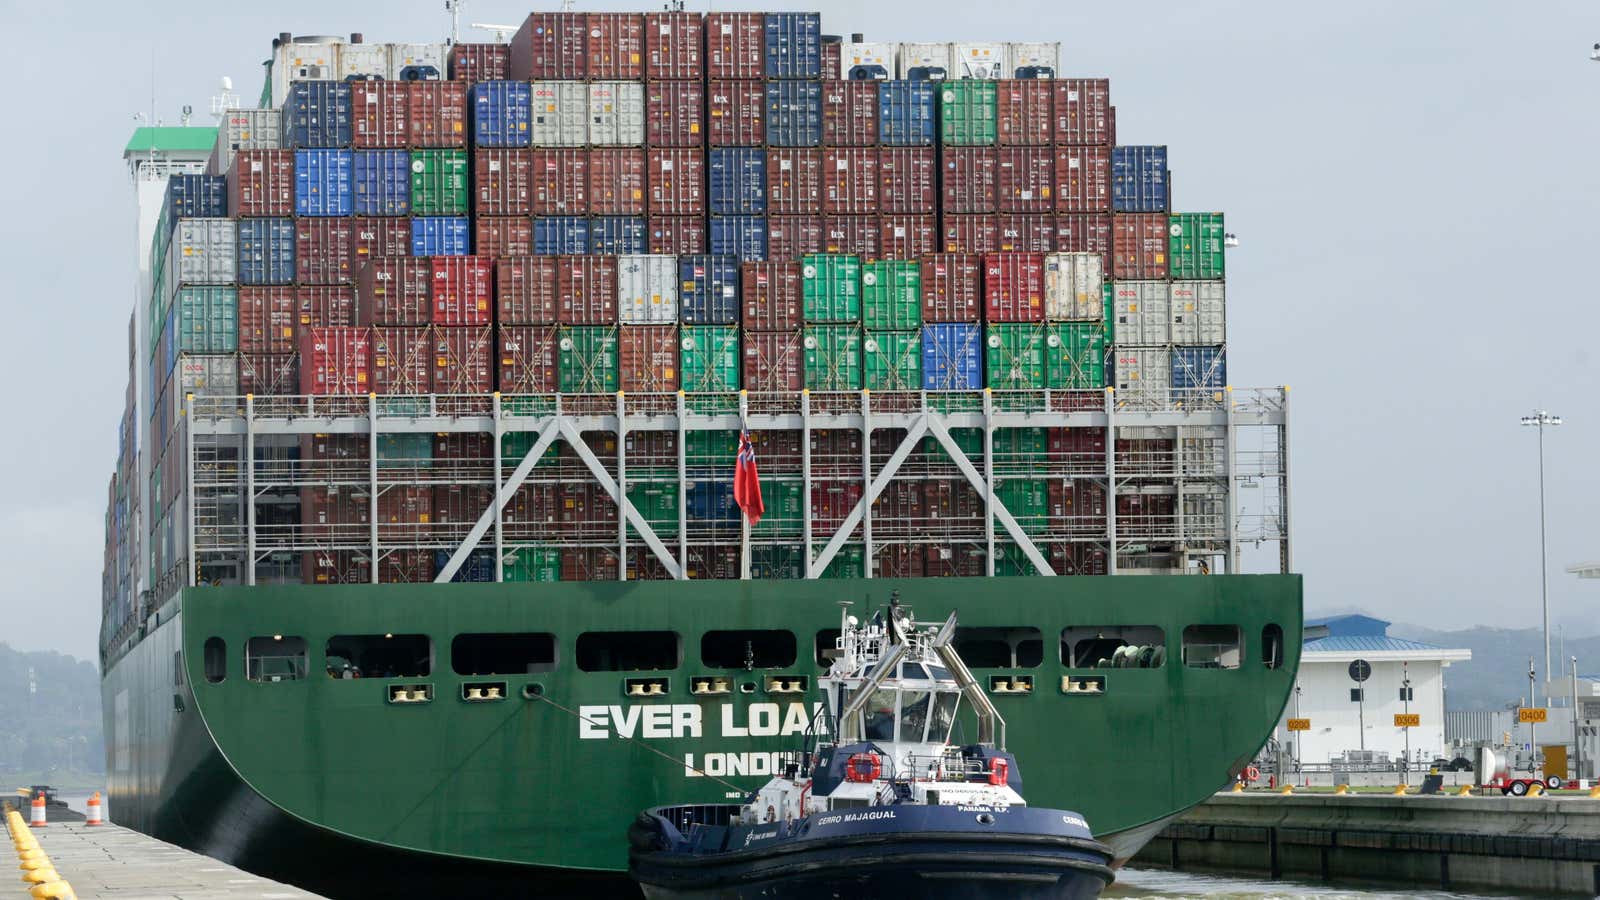 Ships carry 90% of internationally traded goods.